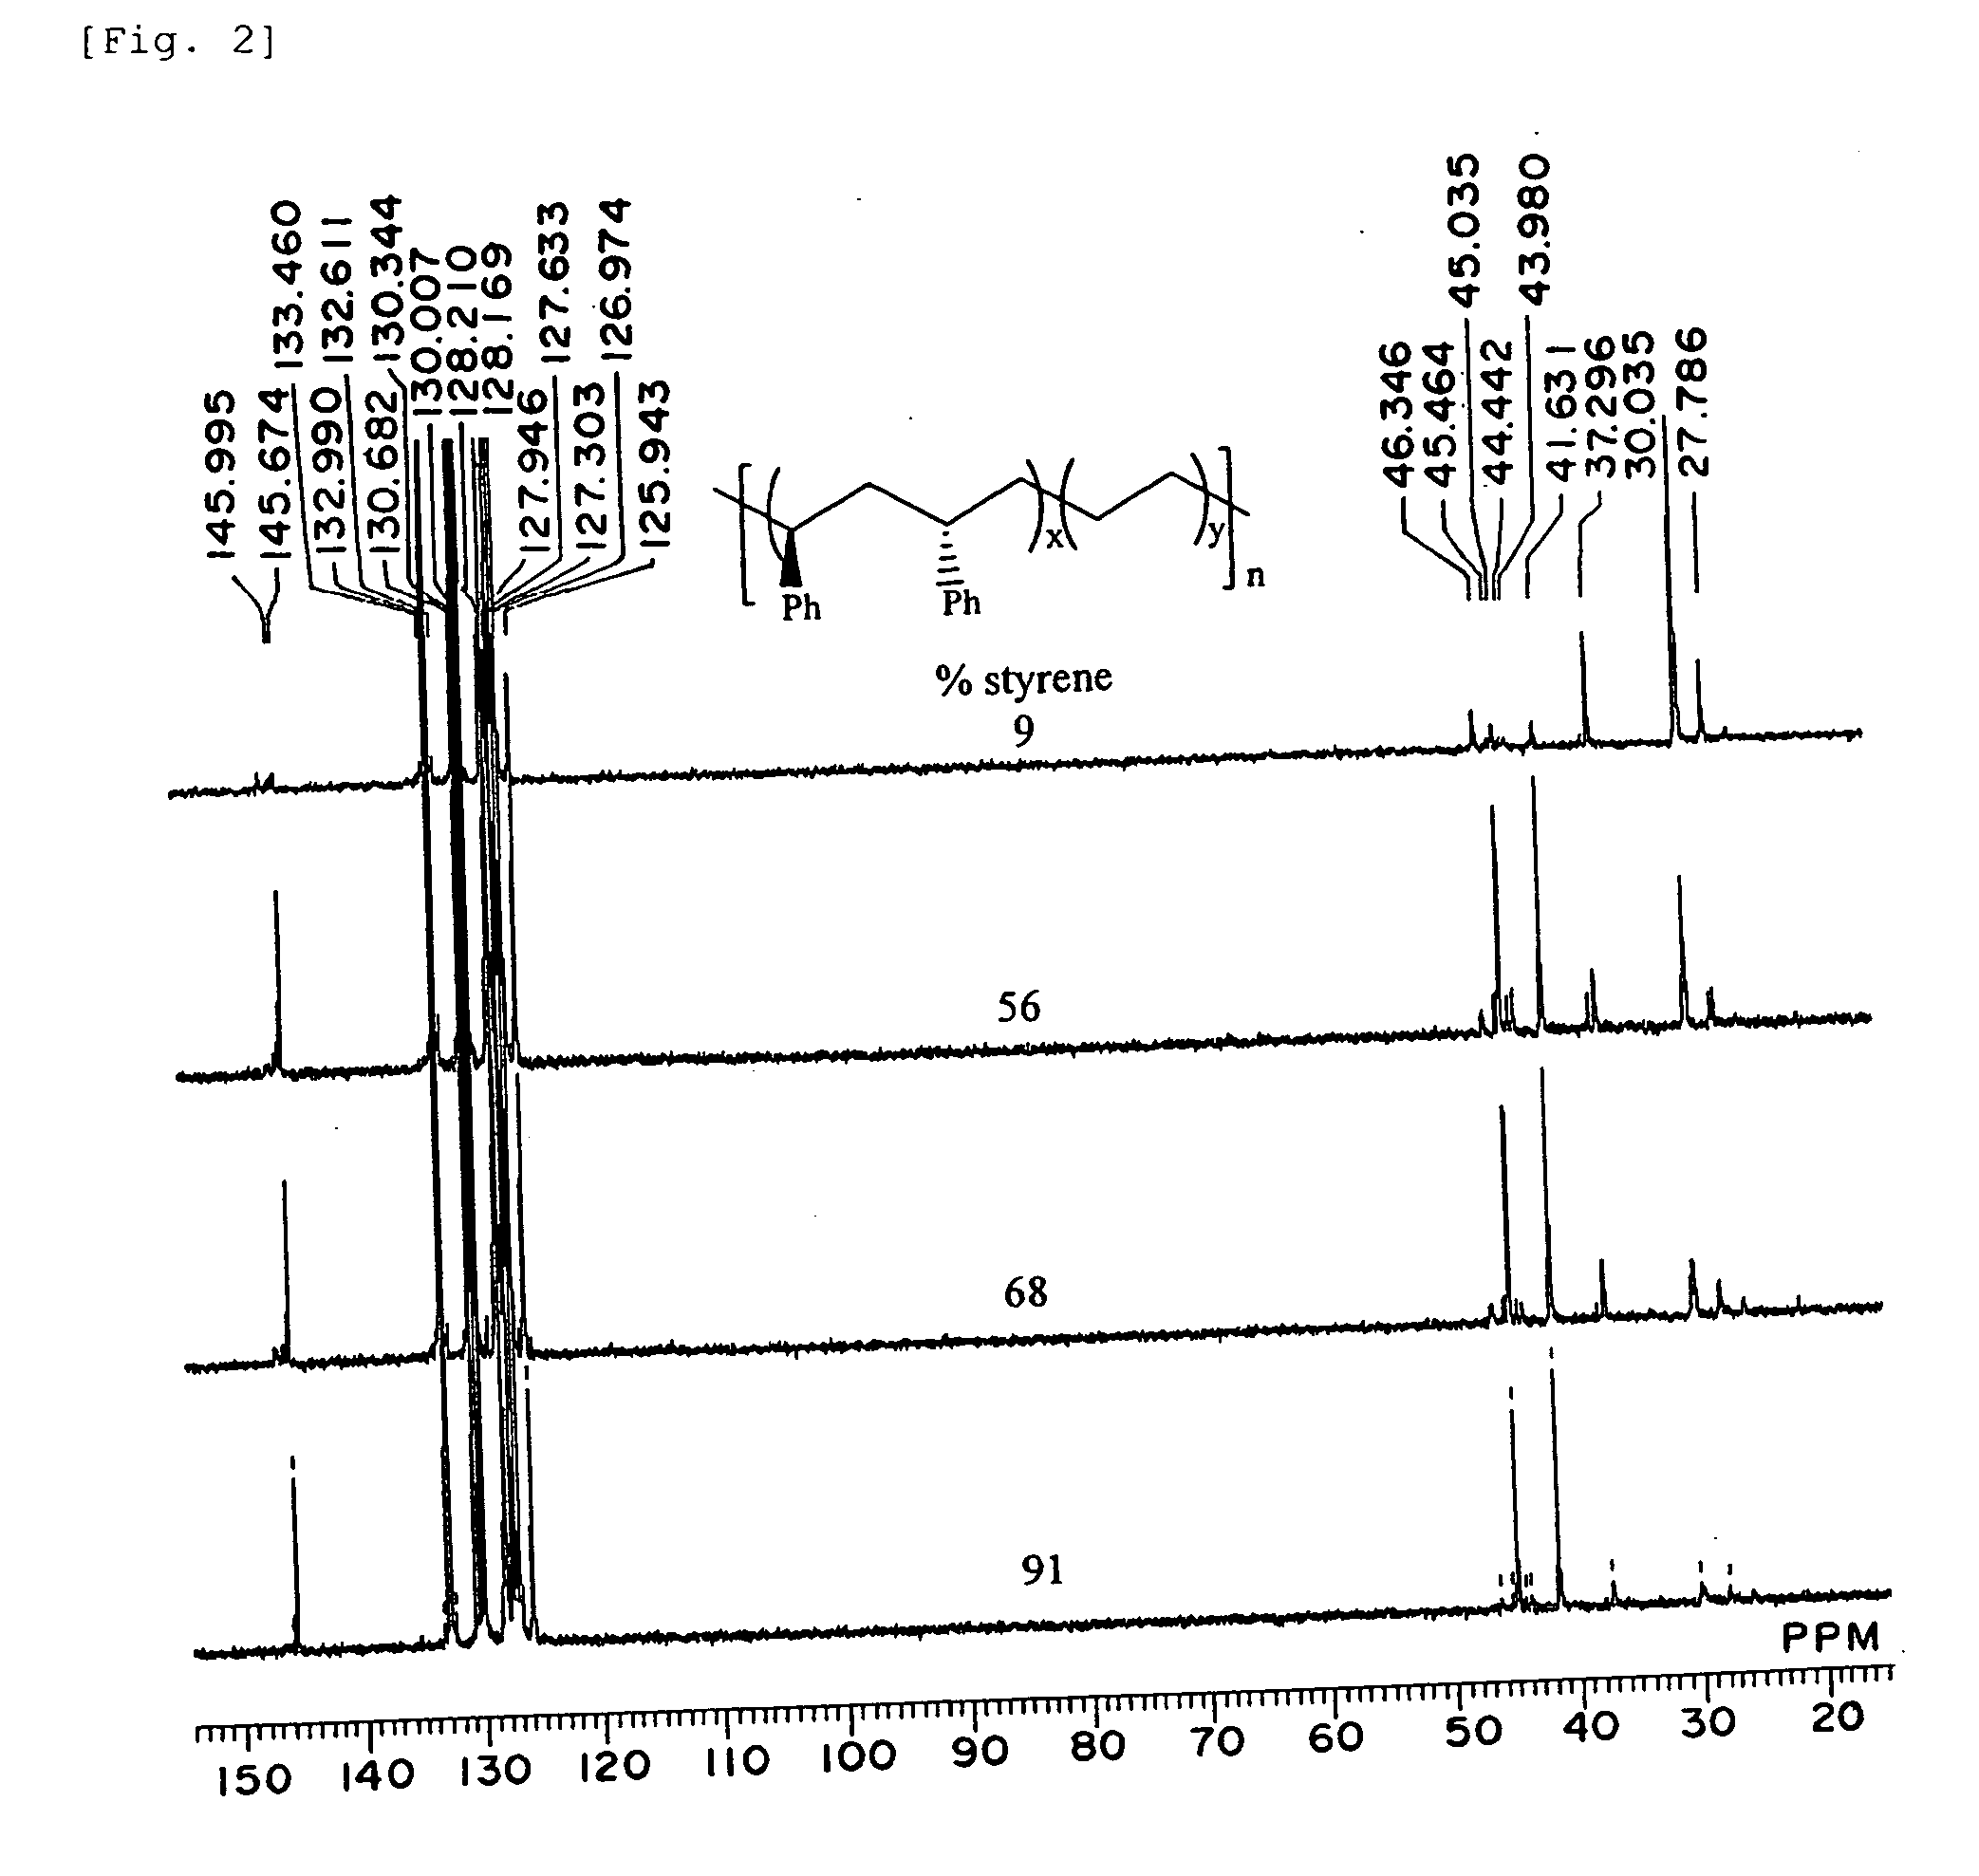 Polymerization Catalyst Compositions Containing Metallocene Complexes and Polymers Produced by Using the Same